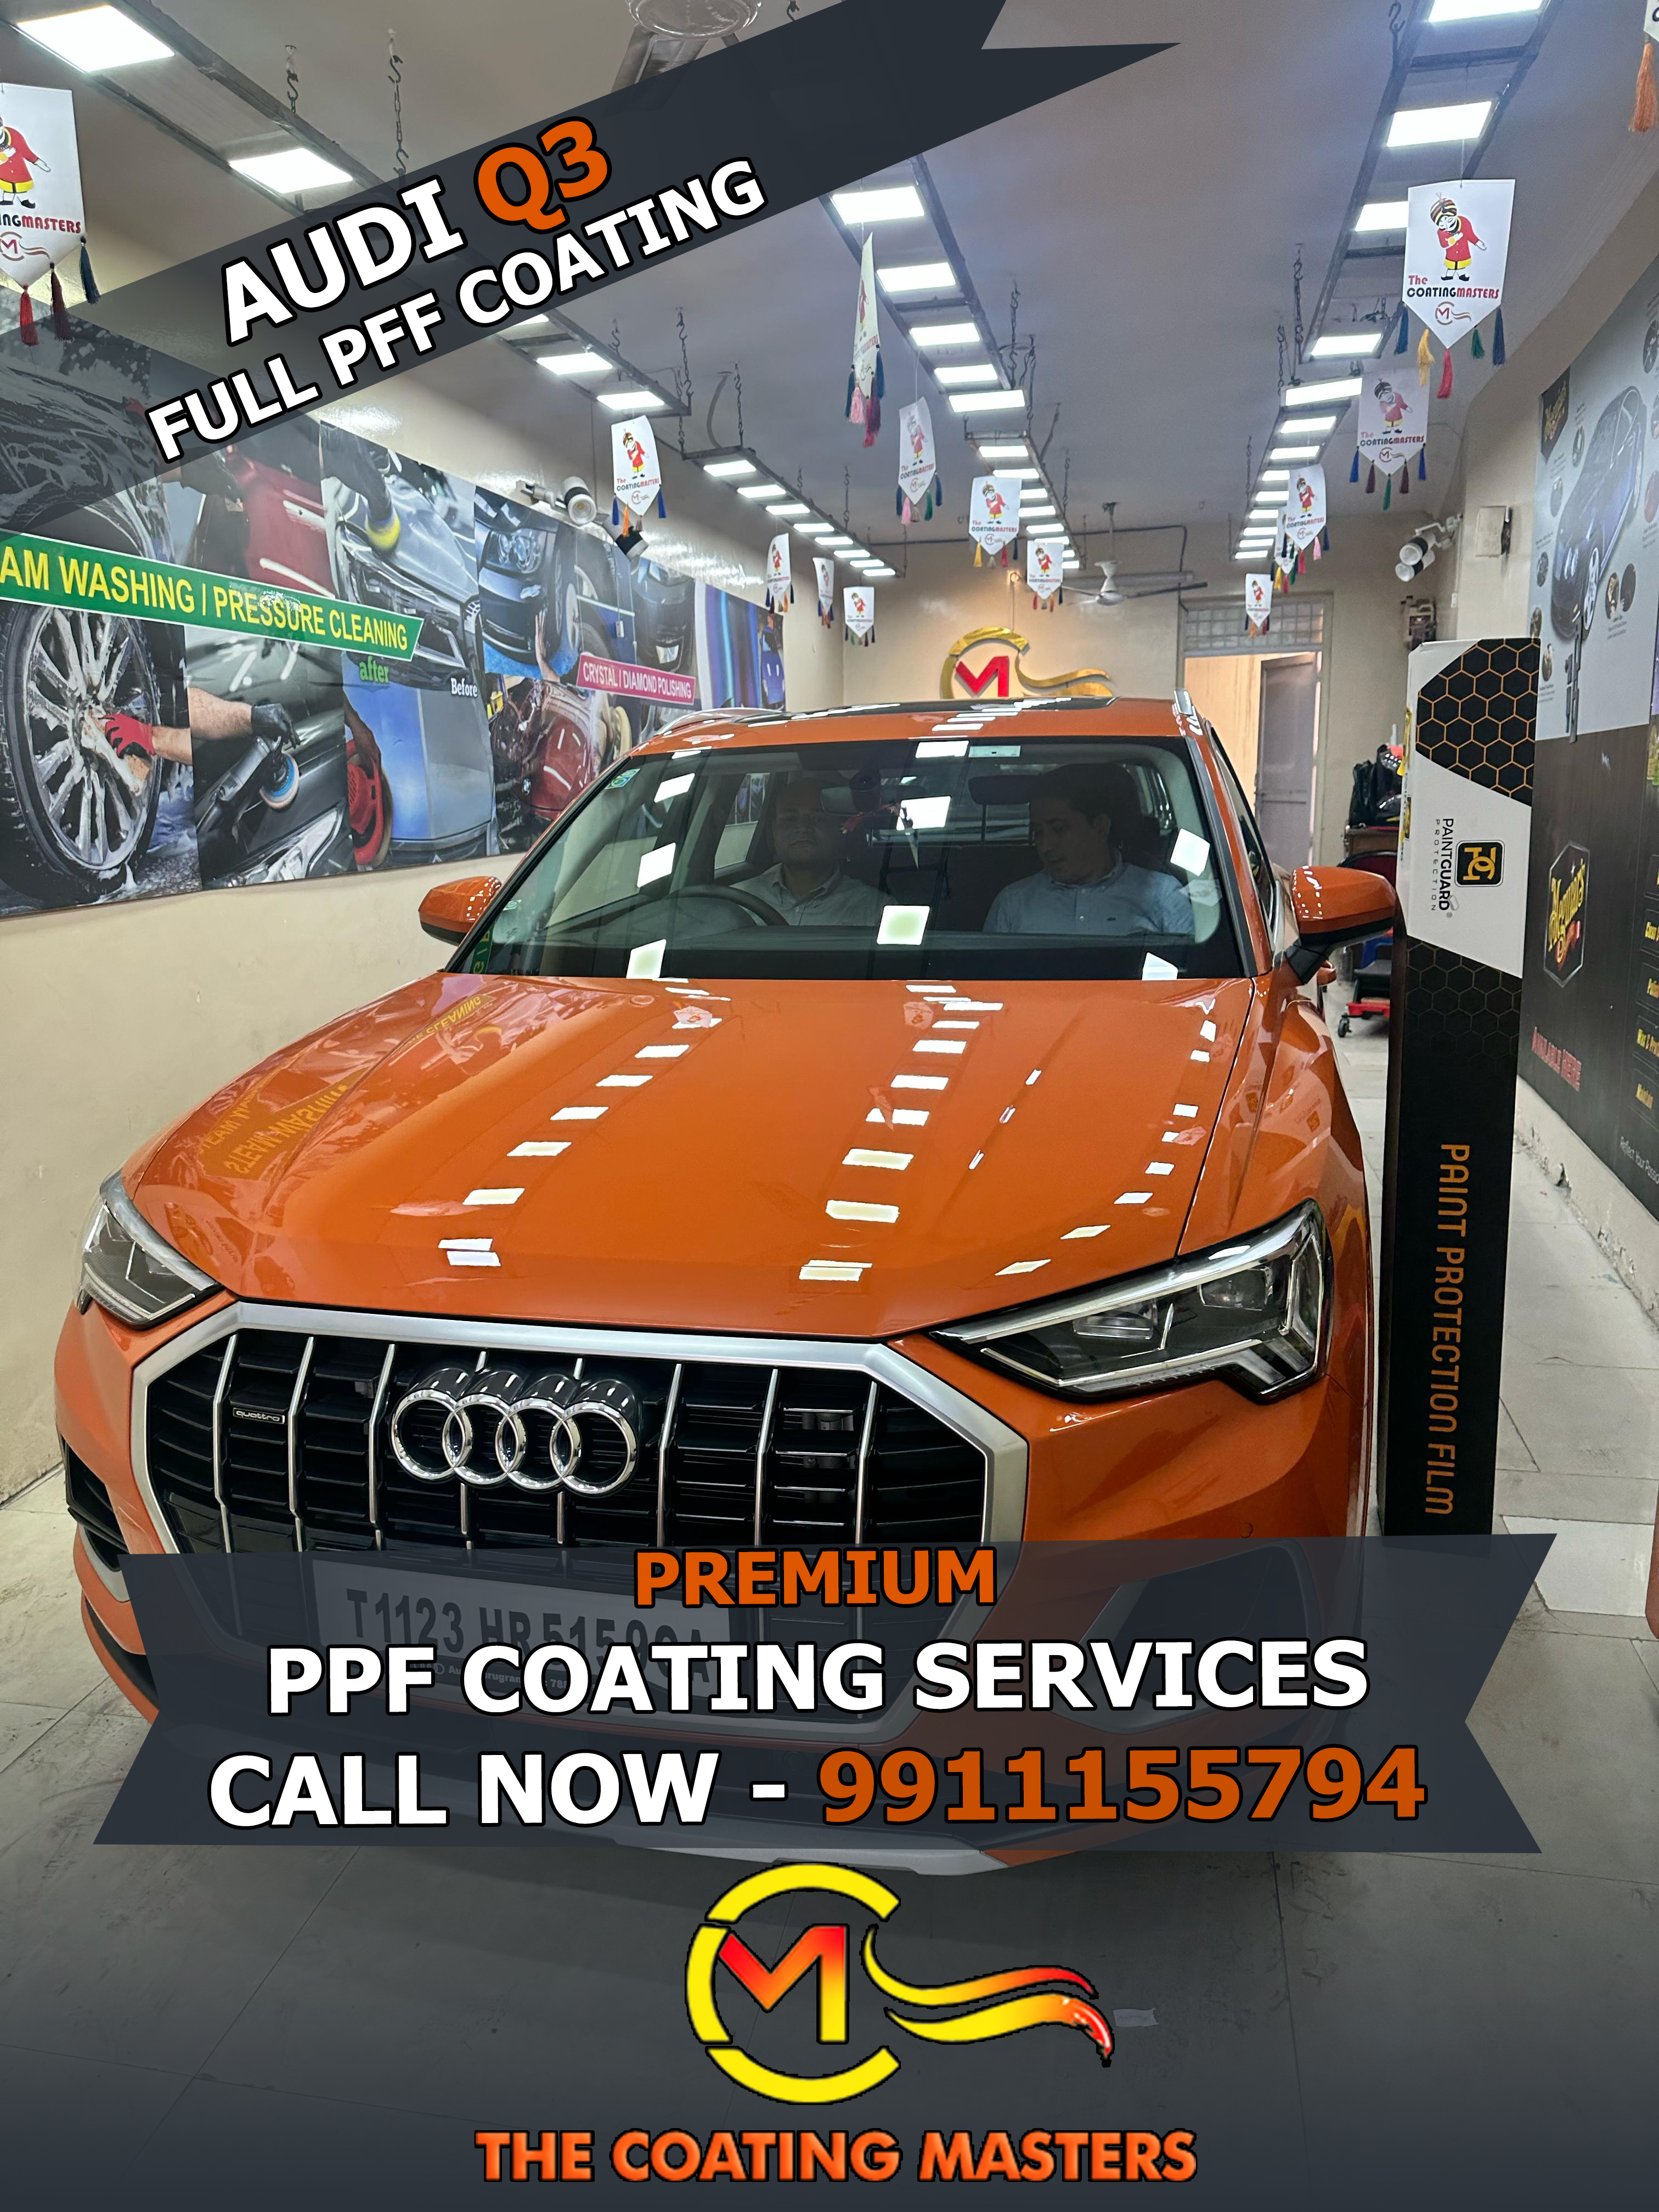 Car Detailing Services by Coating MastersCars and BikesMotor Service - RepairSouth DelhiGreater Kailash